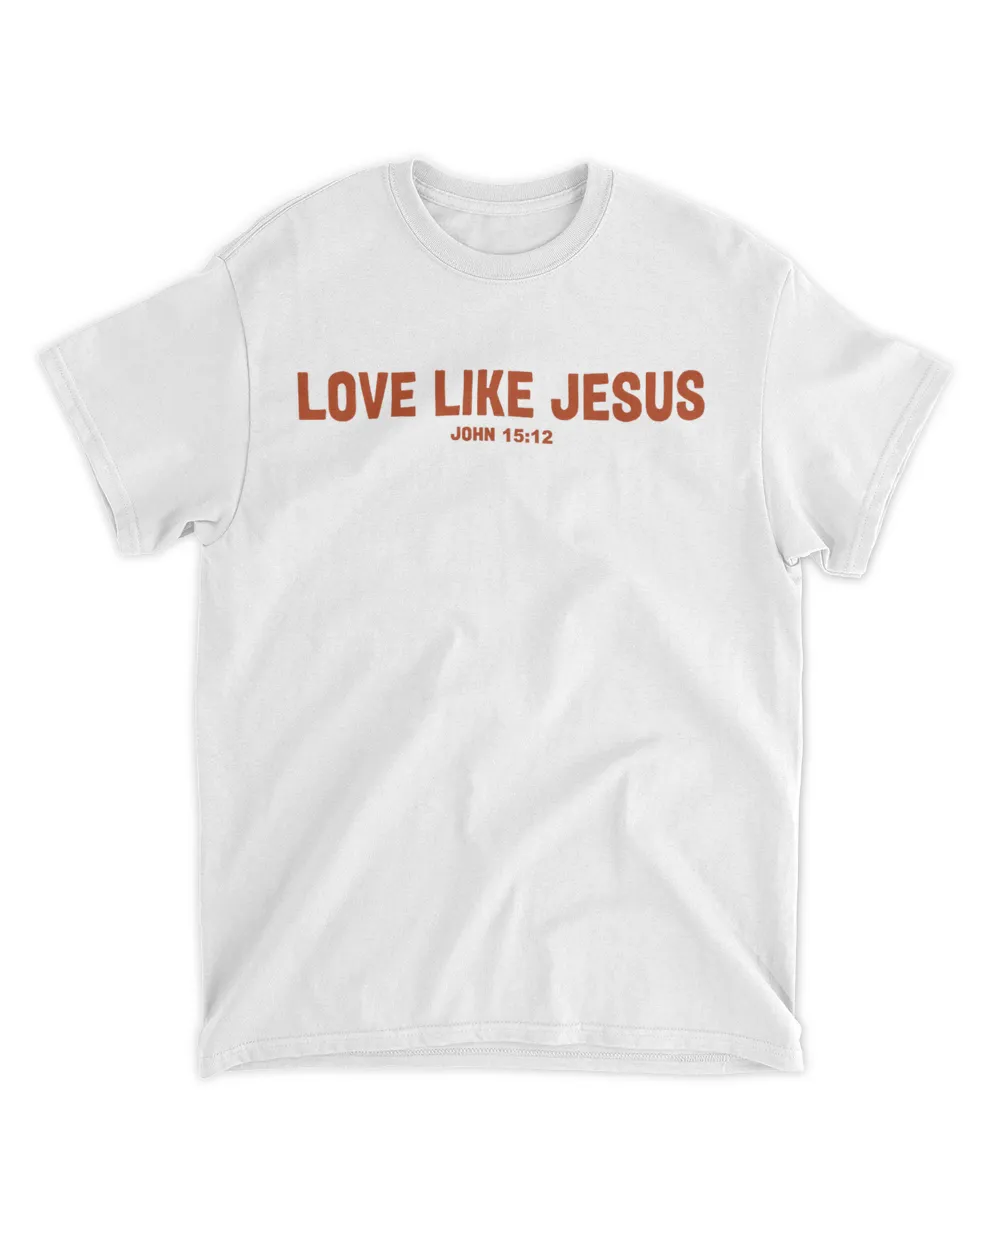 Dear person behind me I hope you know Jesus loves Love like Jesus shirt